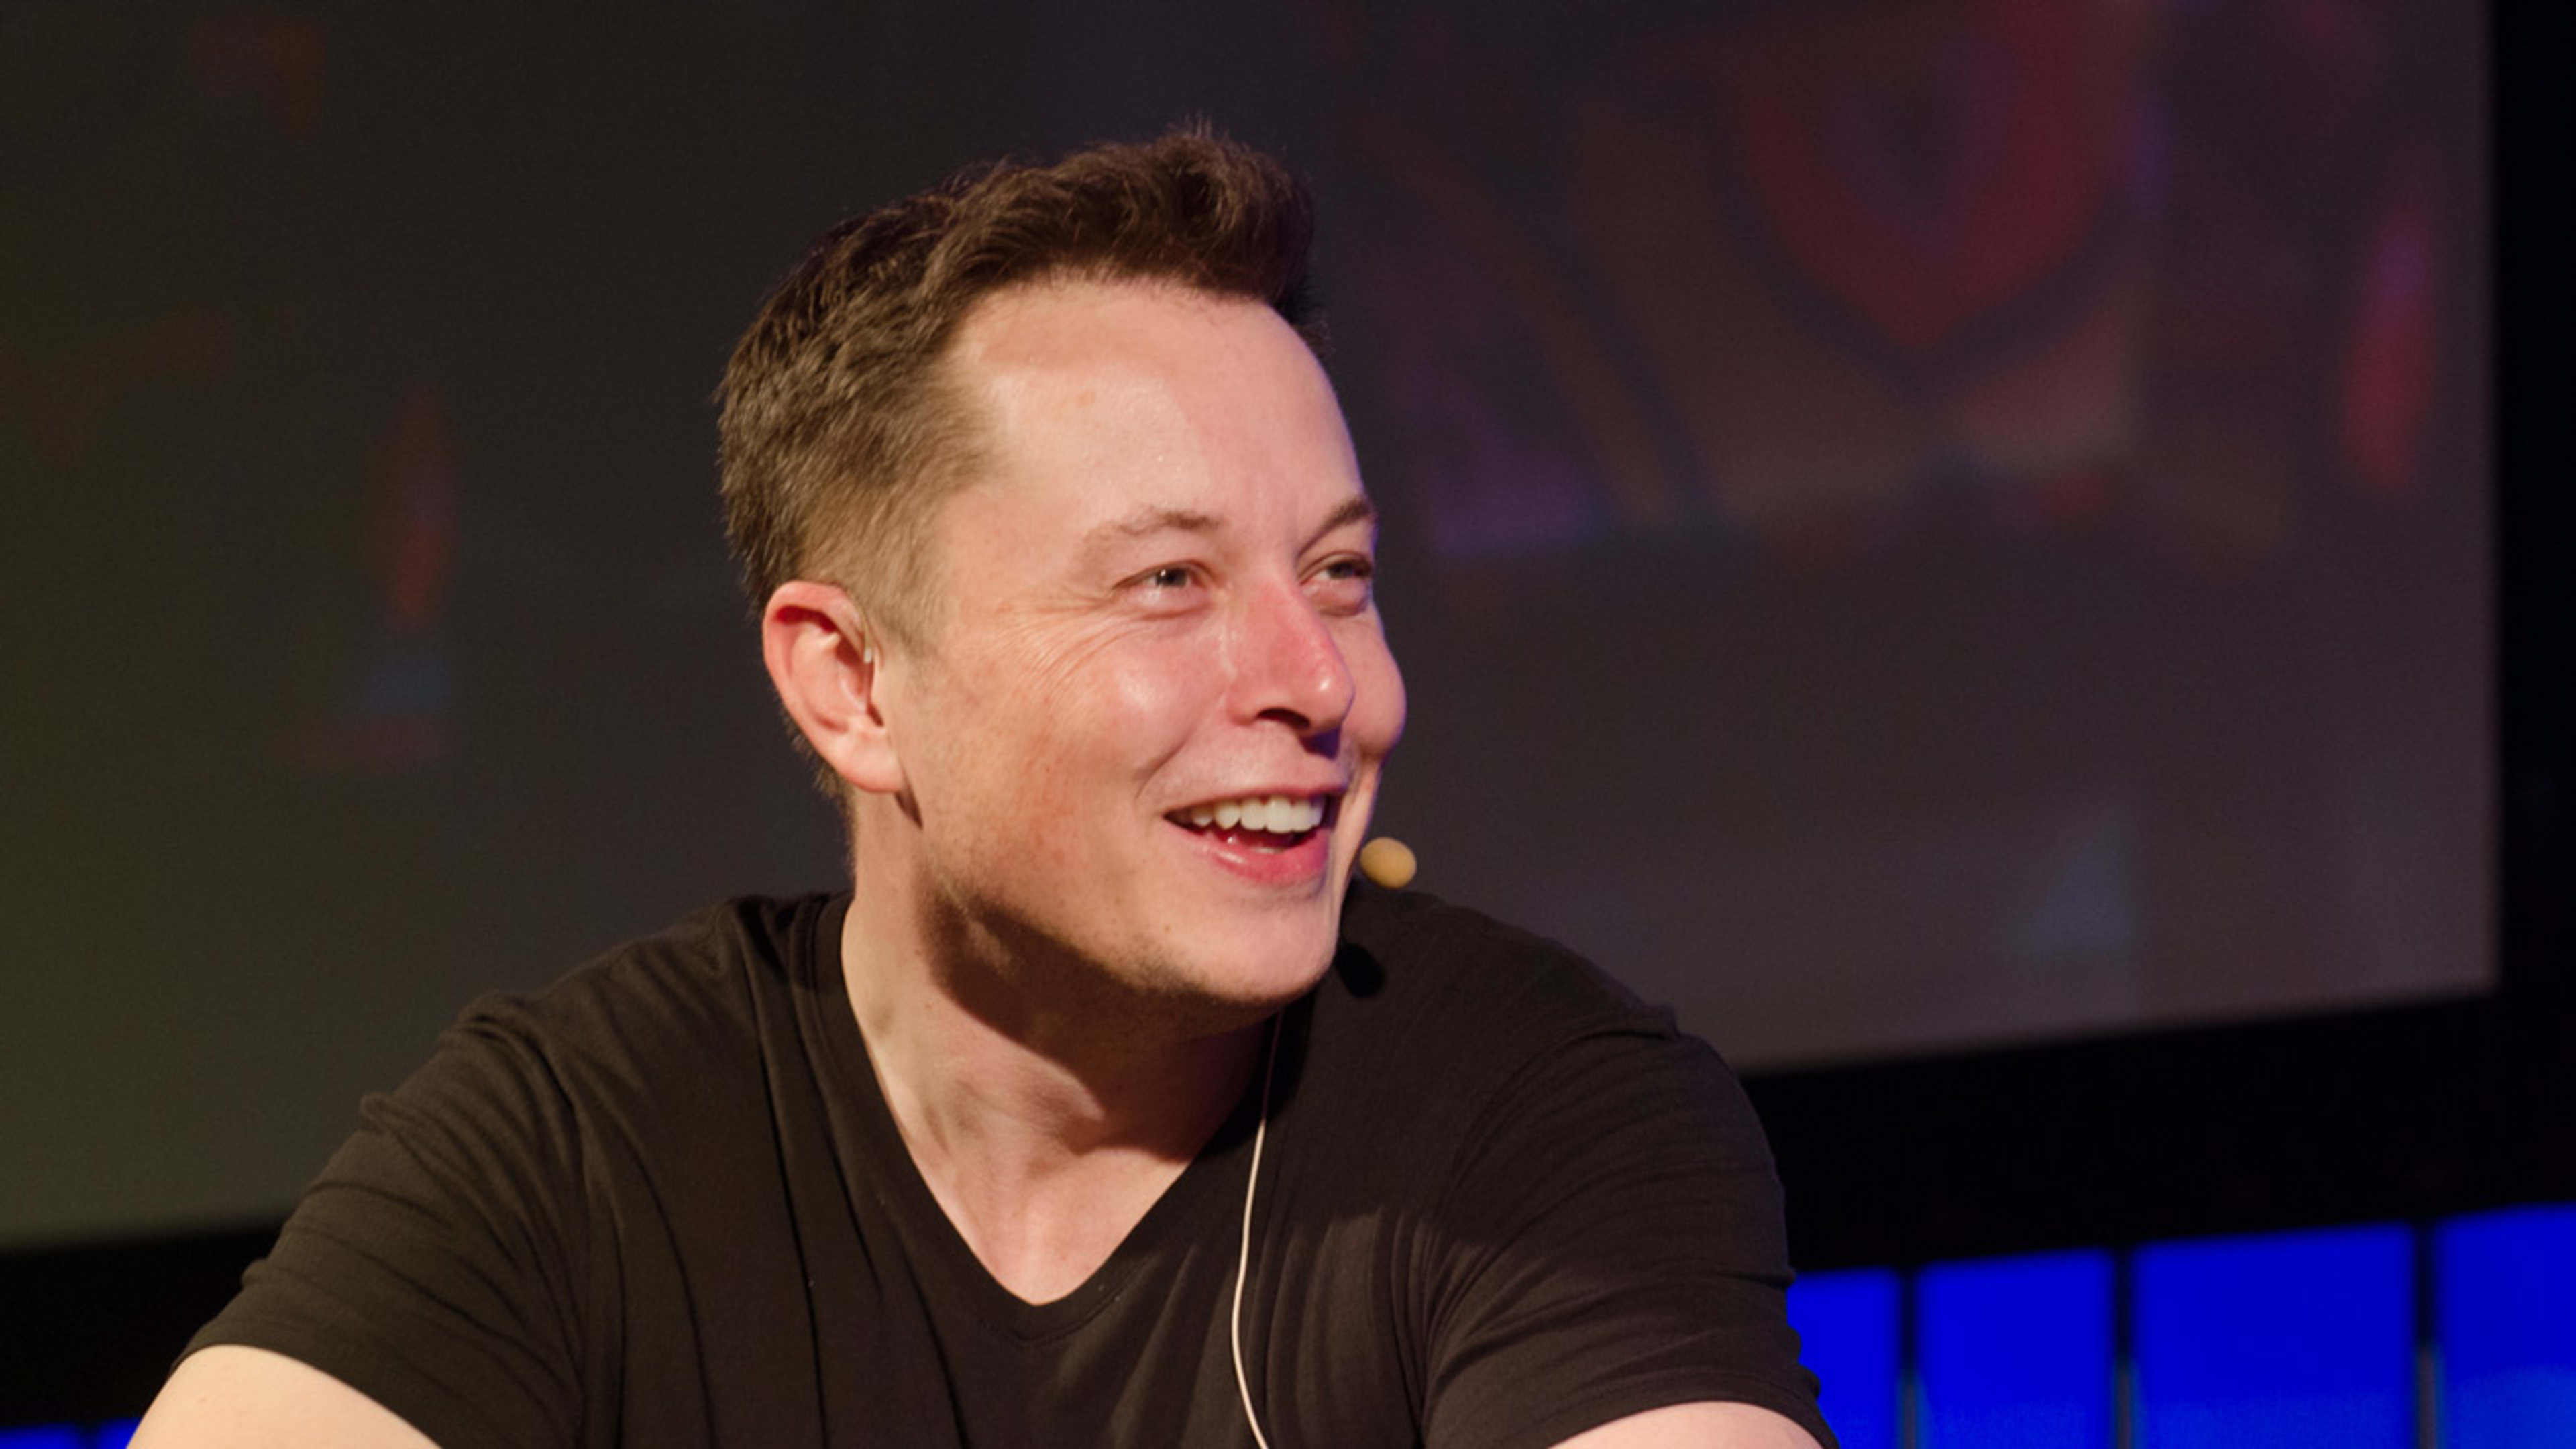 Elon Musk just gave over $100 million to the Boring Company